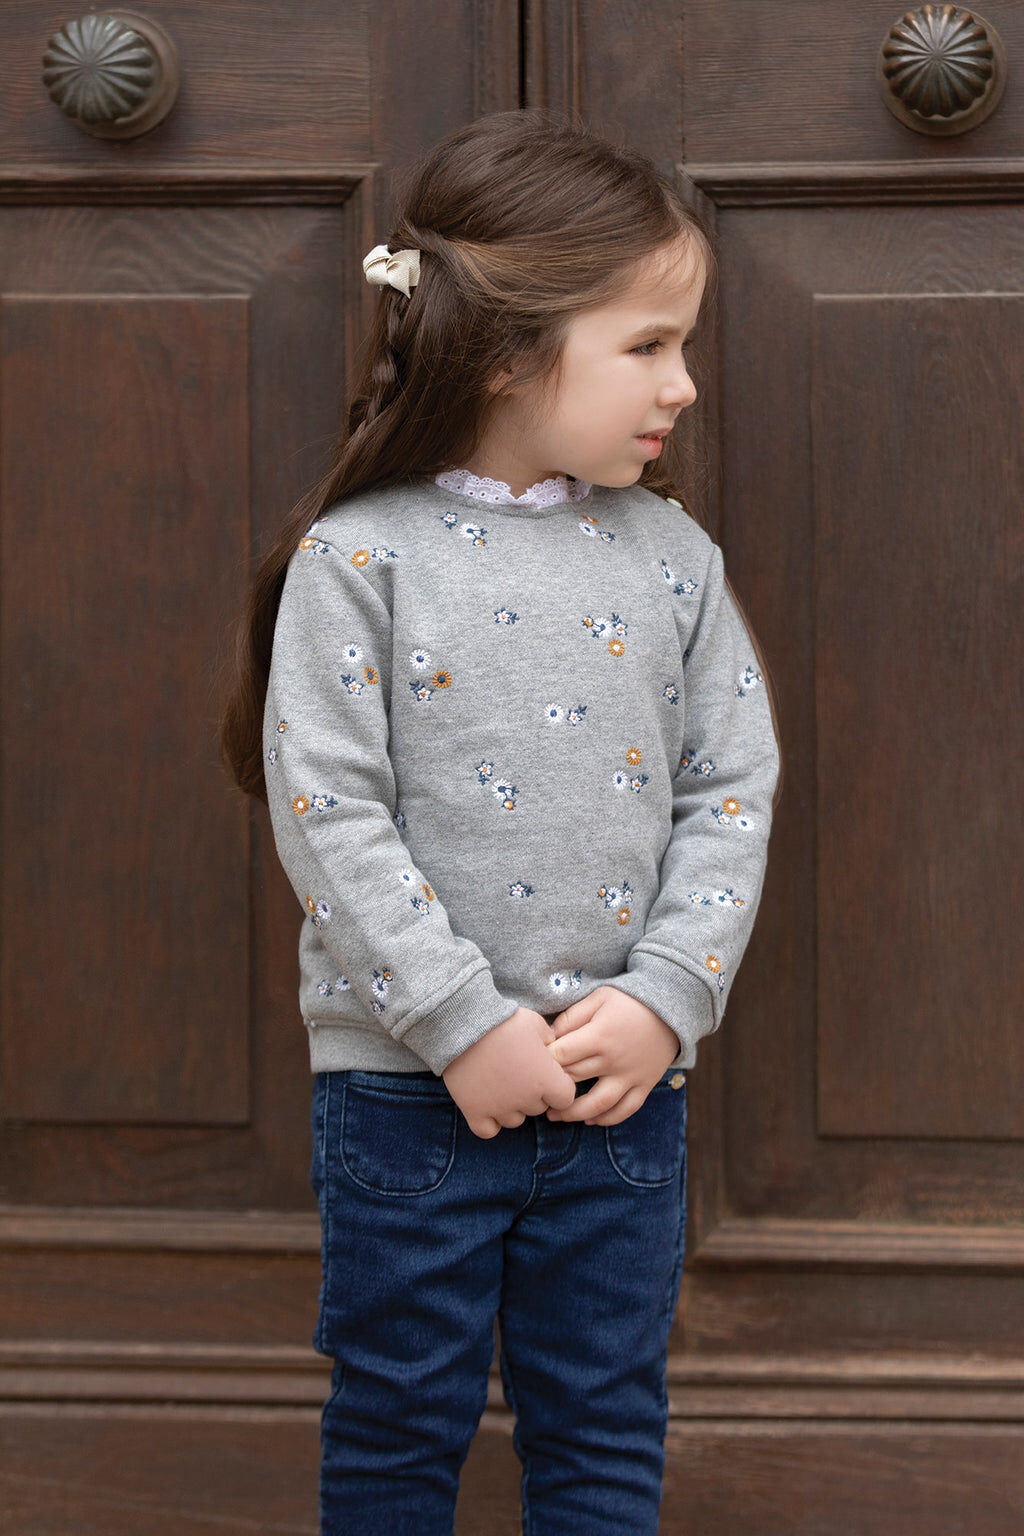 Sweatshirt - Grey China Embrodery floral